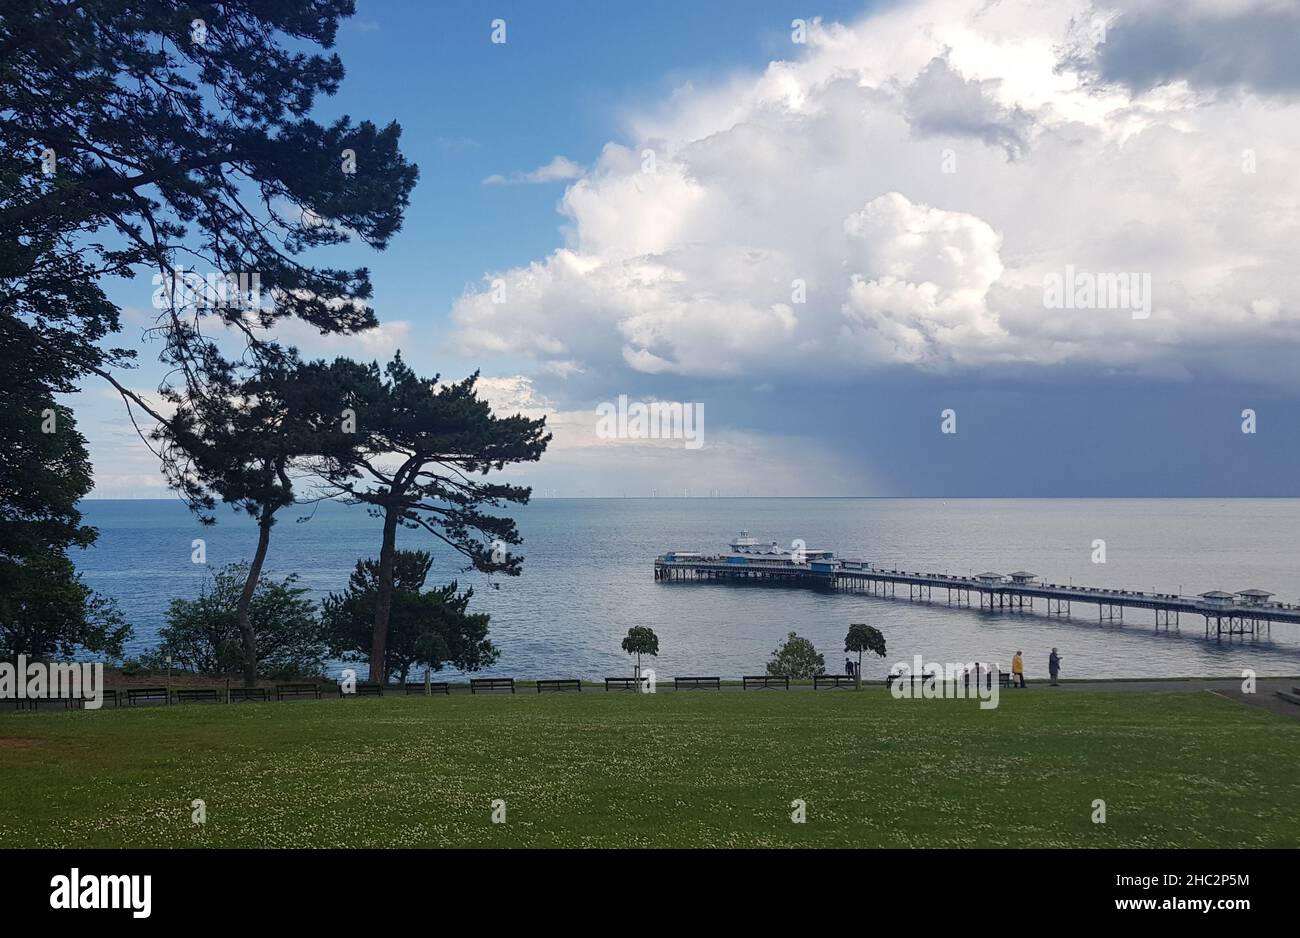 A view of the pier at Llandudno, as seen from Happy Valley Stock Photo